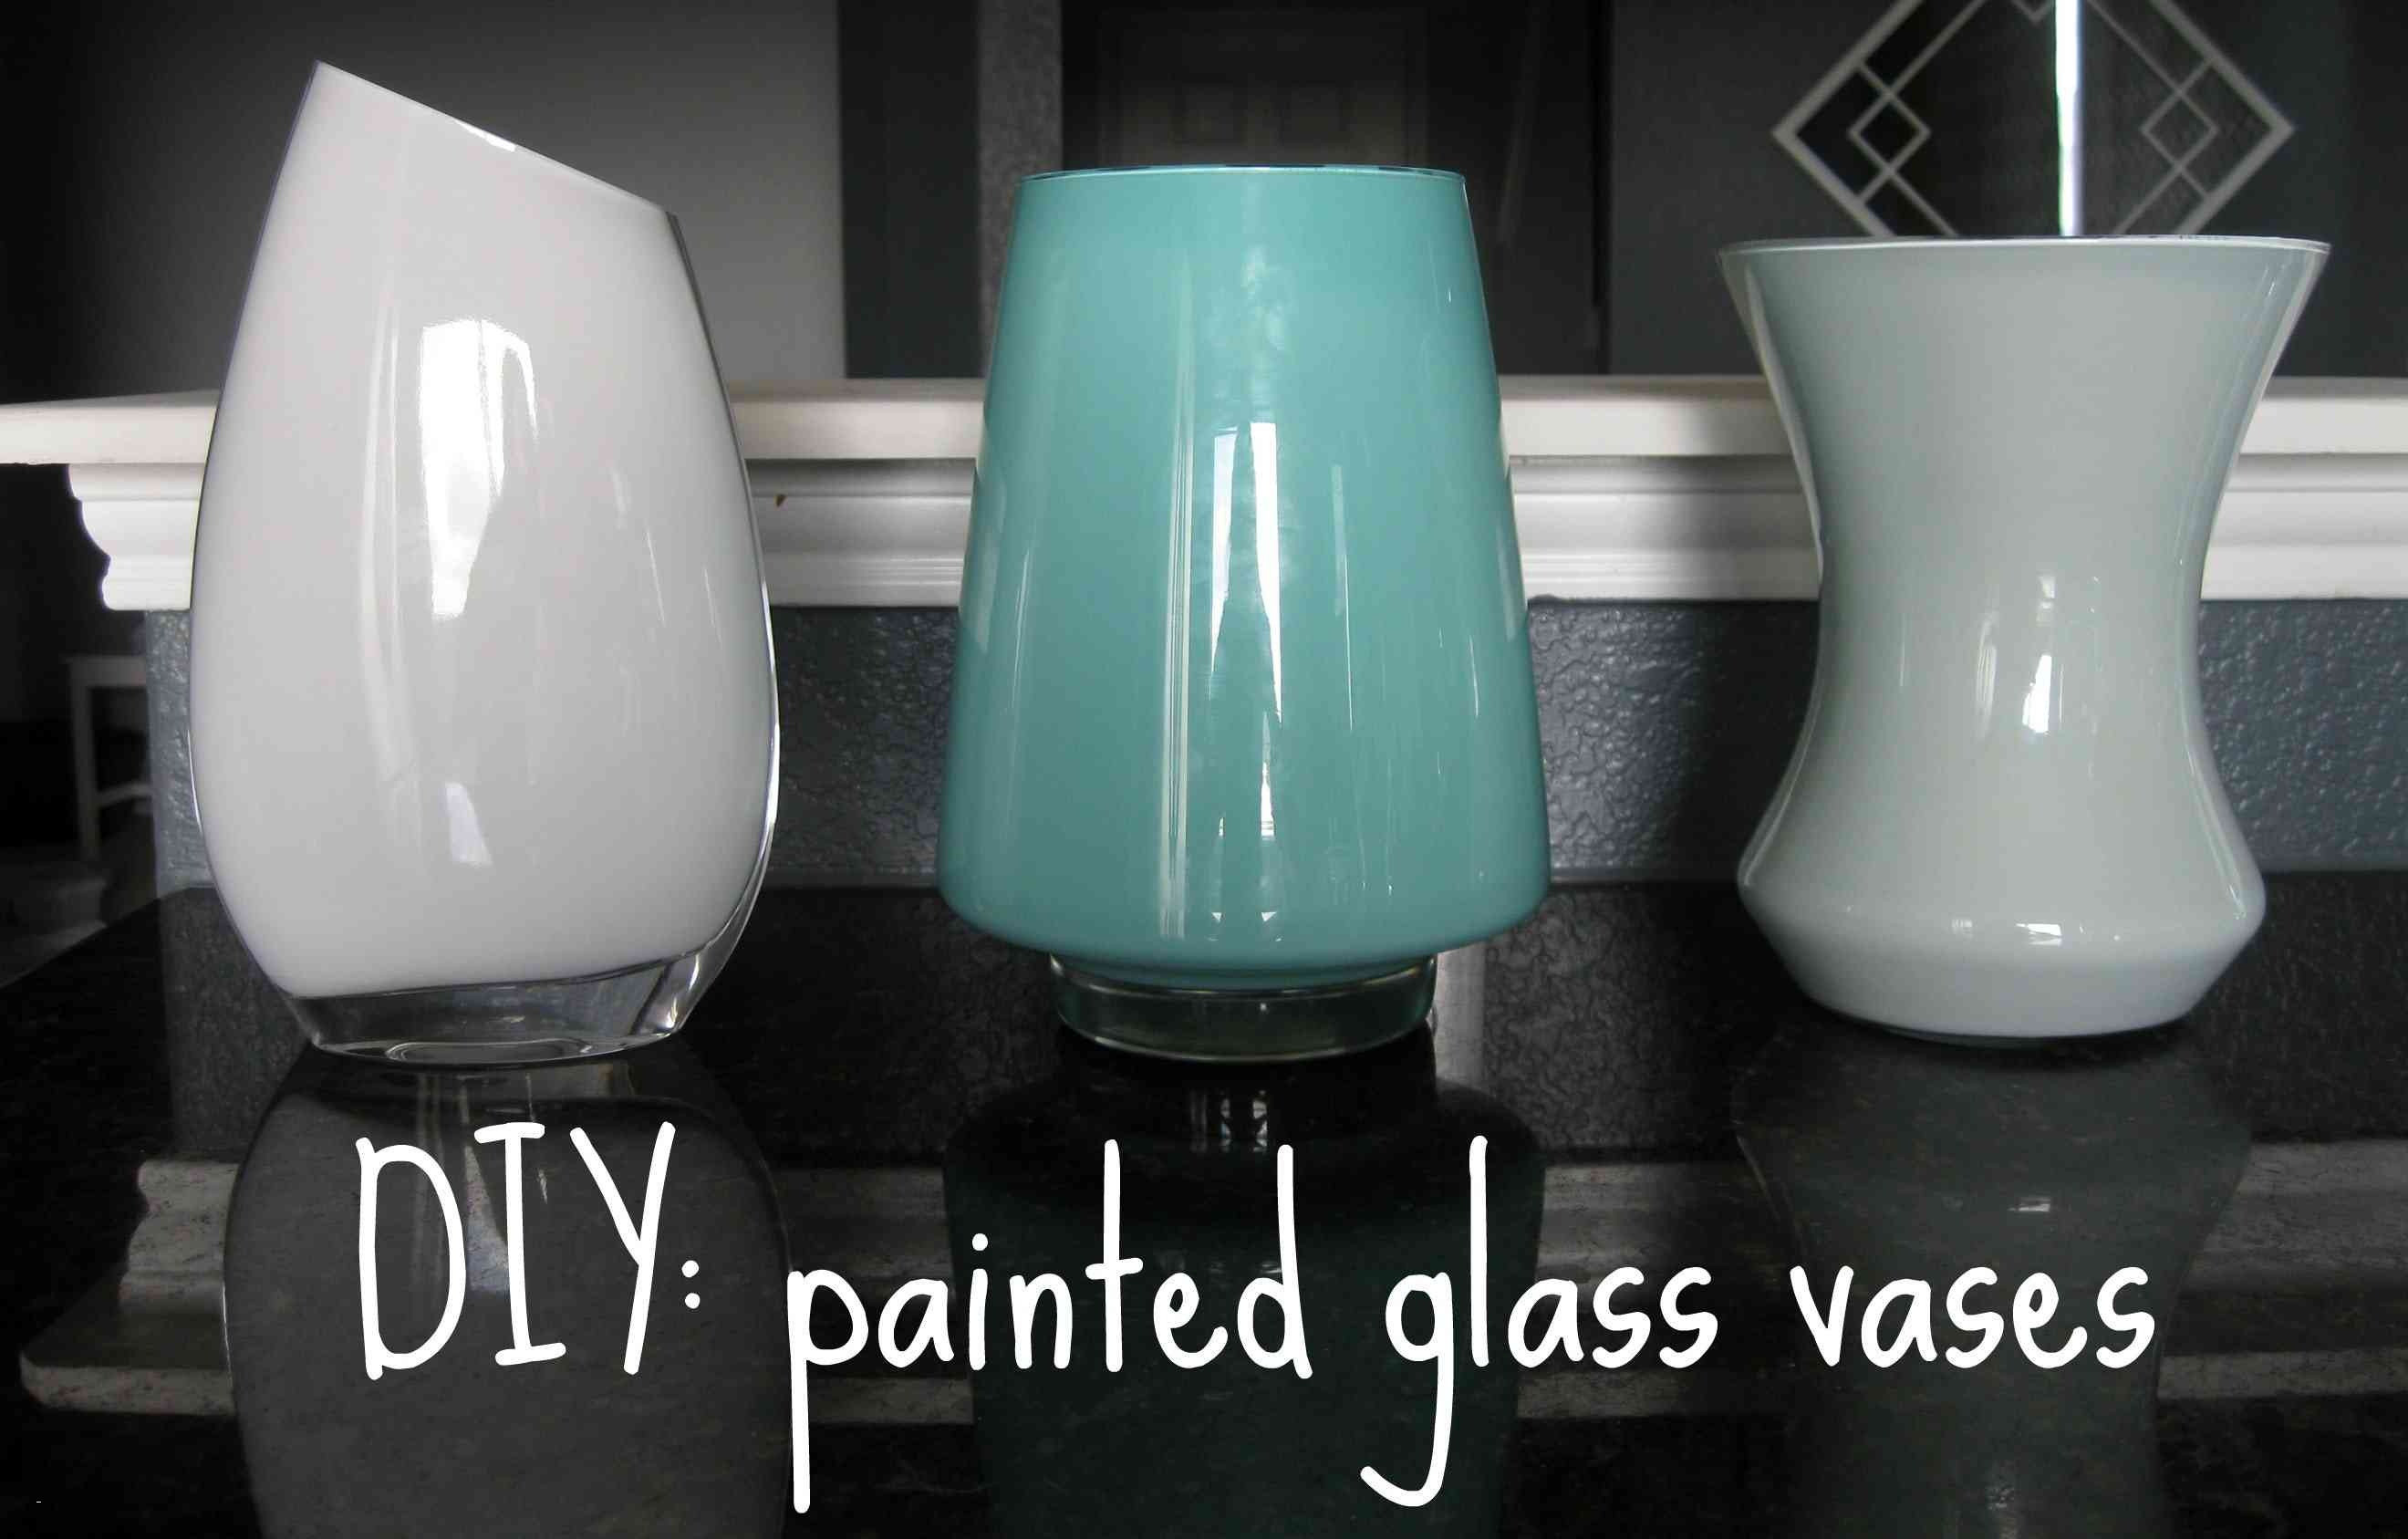 16 Nice Aqua Vases for Sale 2024 free download aqua vases for sale of gray glass vase image gs165h vases floral supply glass 8 x 6 silver pertaining to gray glass vase collection coloring painting best kitchen coloring new inside paint n